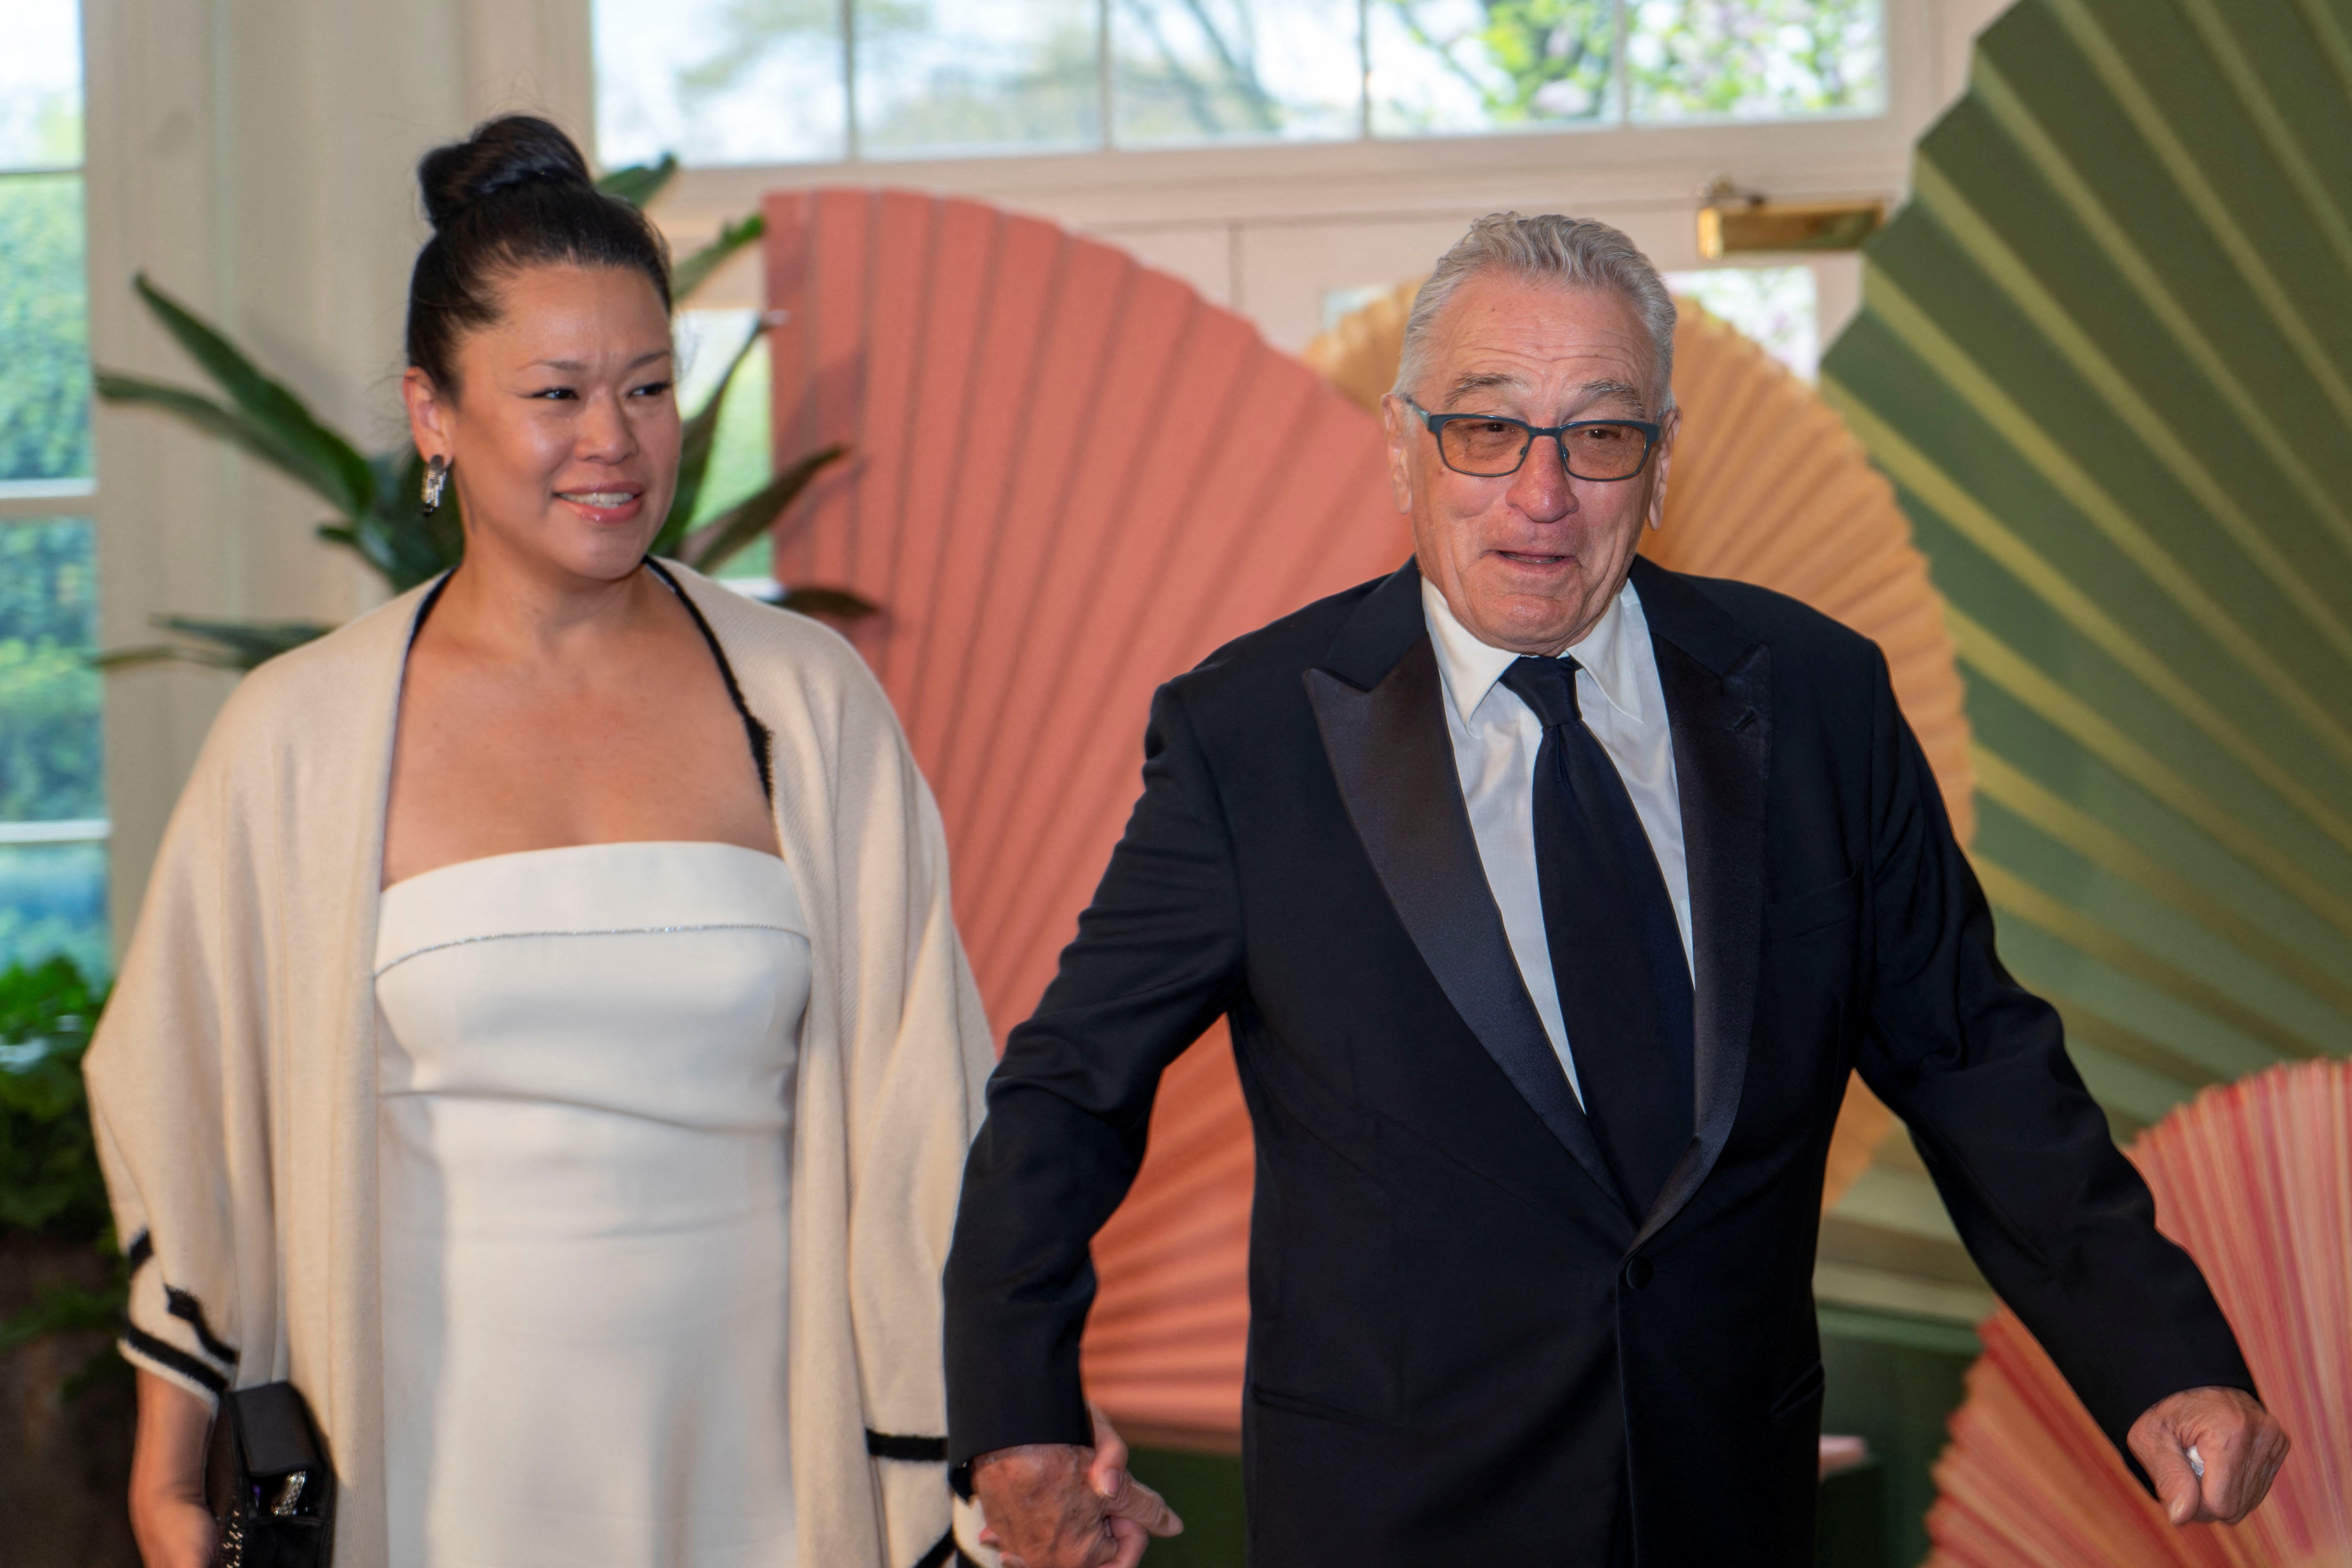 Hollywood actor and outspoken Mr Trump critic De Niro arrived hand in hand with his girlfriend, Tiffany Chen